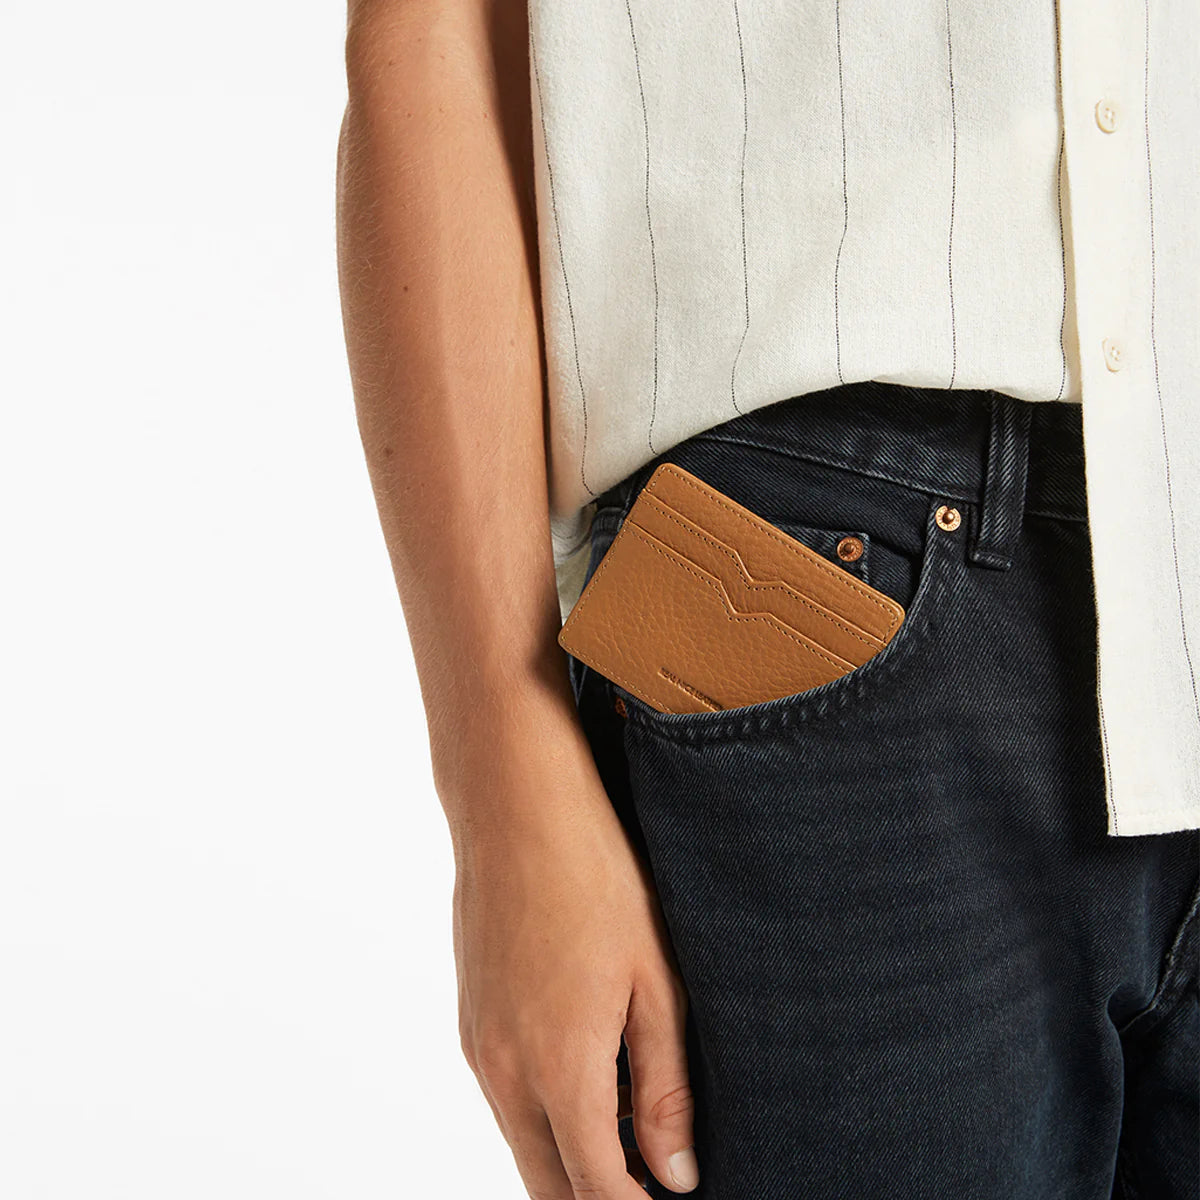 TOGETHER FOR NOW WALLET (Tan)